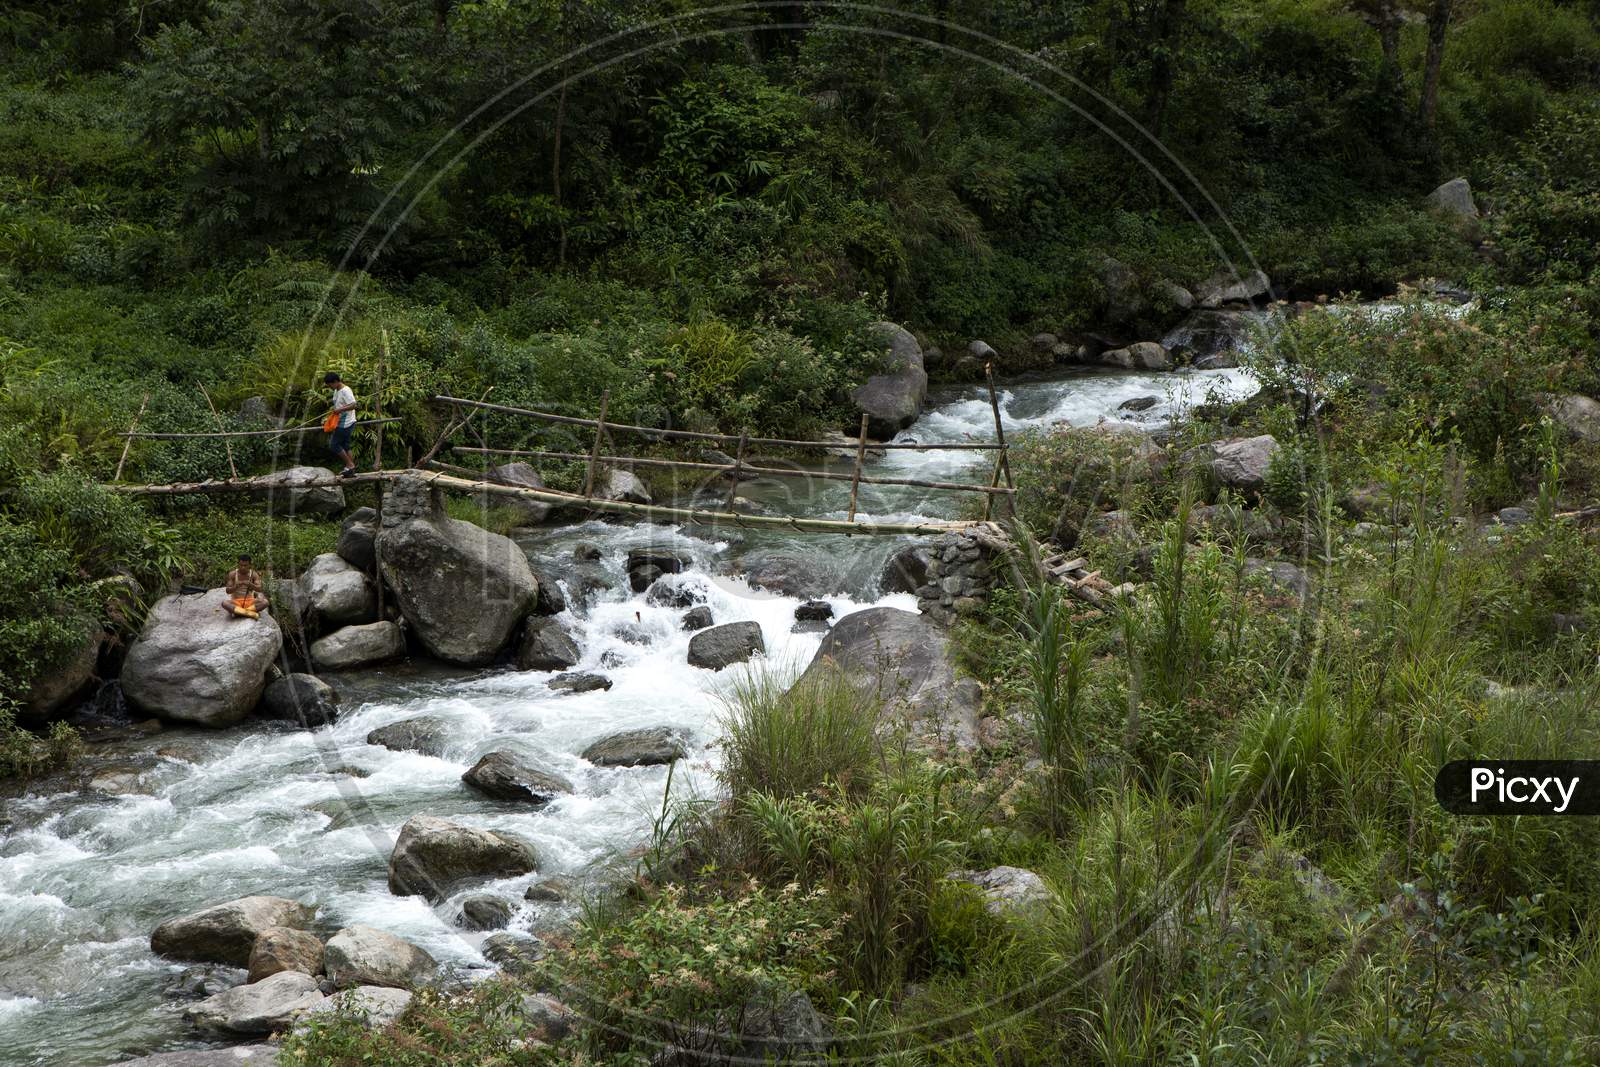 Two Fishermen Enjoying Fishing By Crossing The River Through A Bamboo Bridge Inside A Forest In Sikkim In India